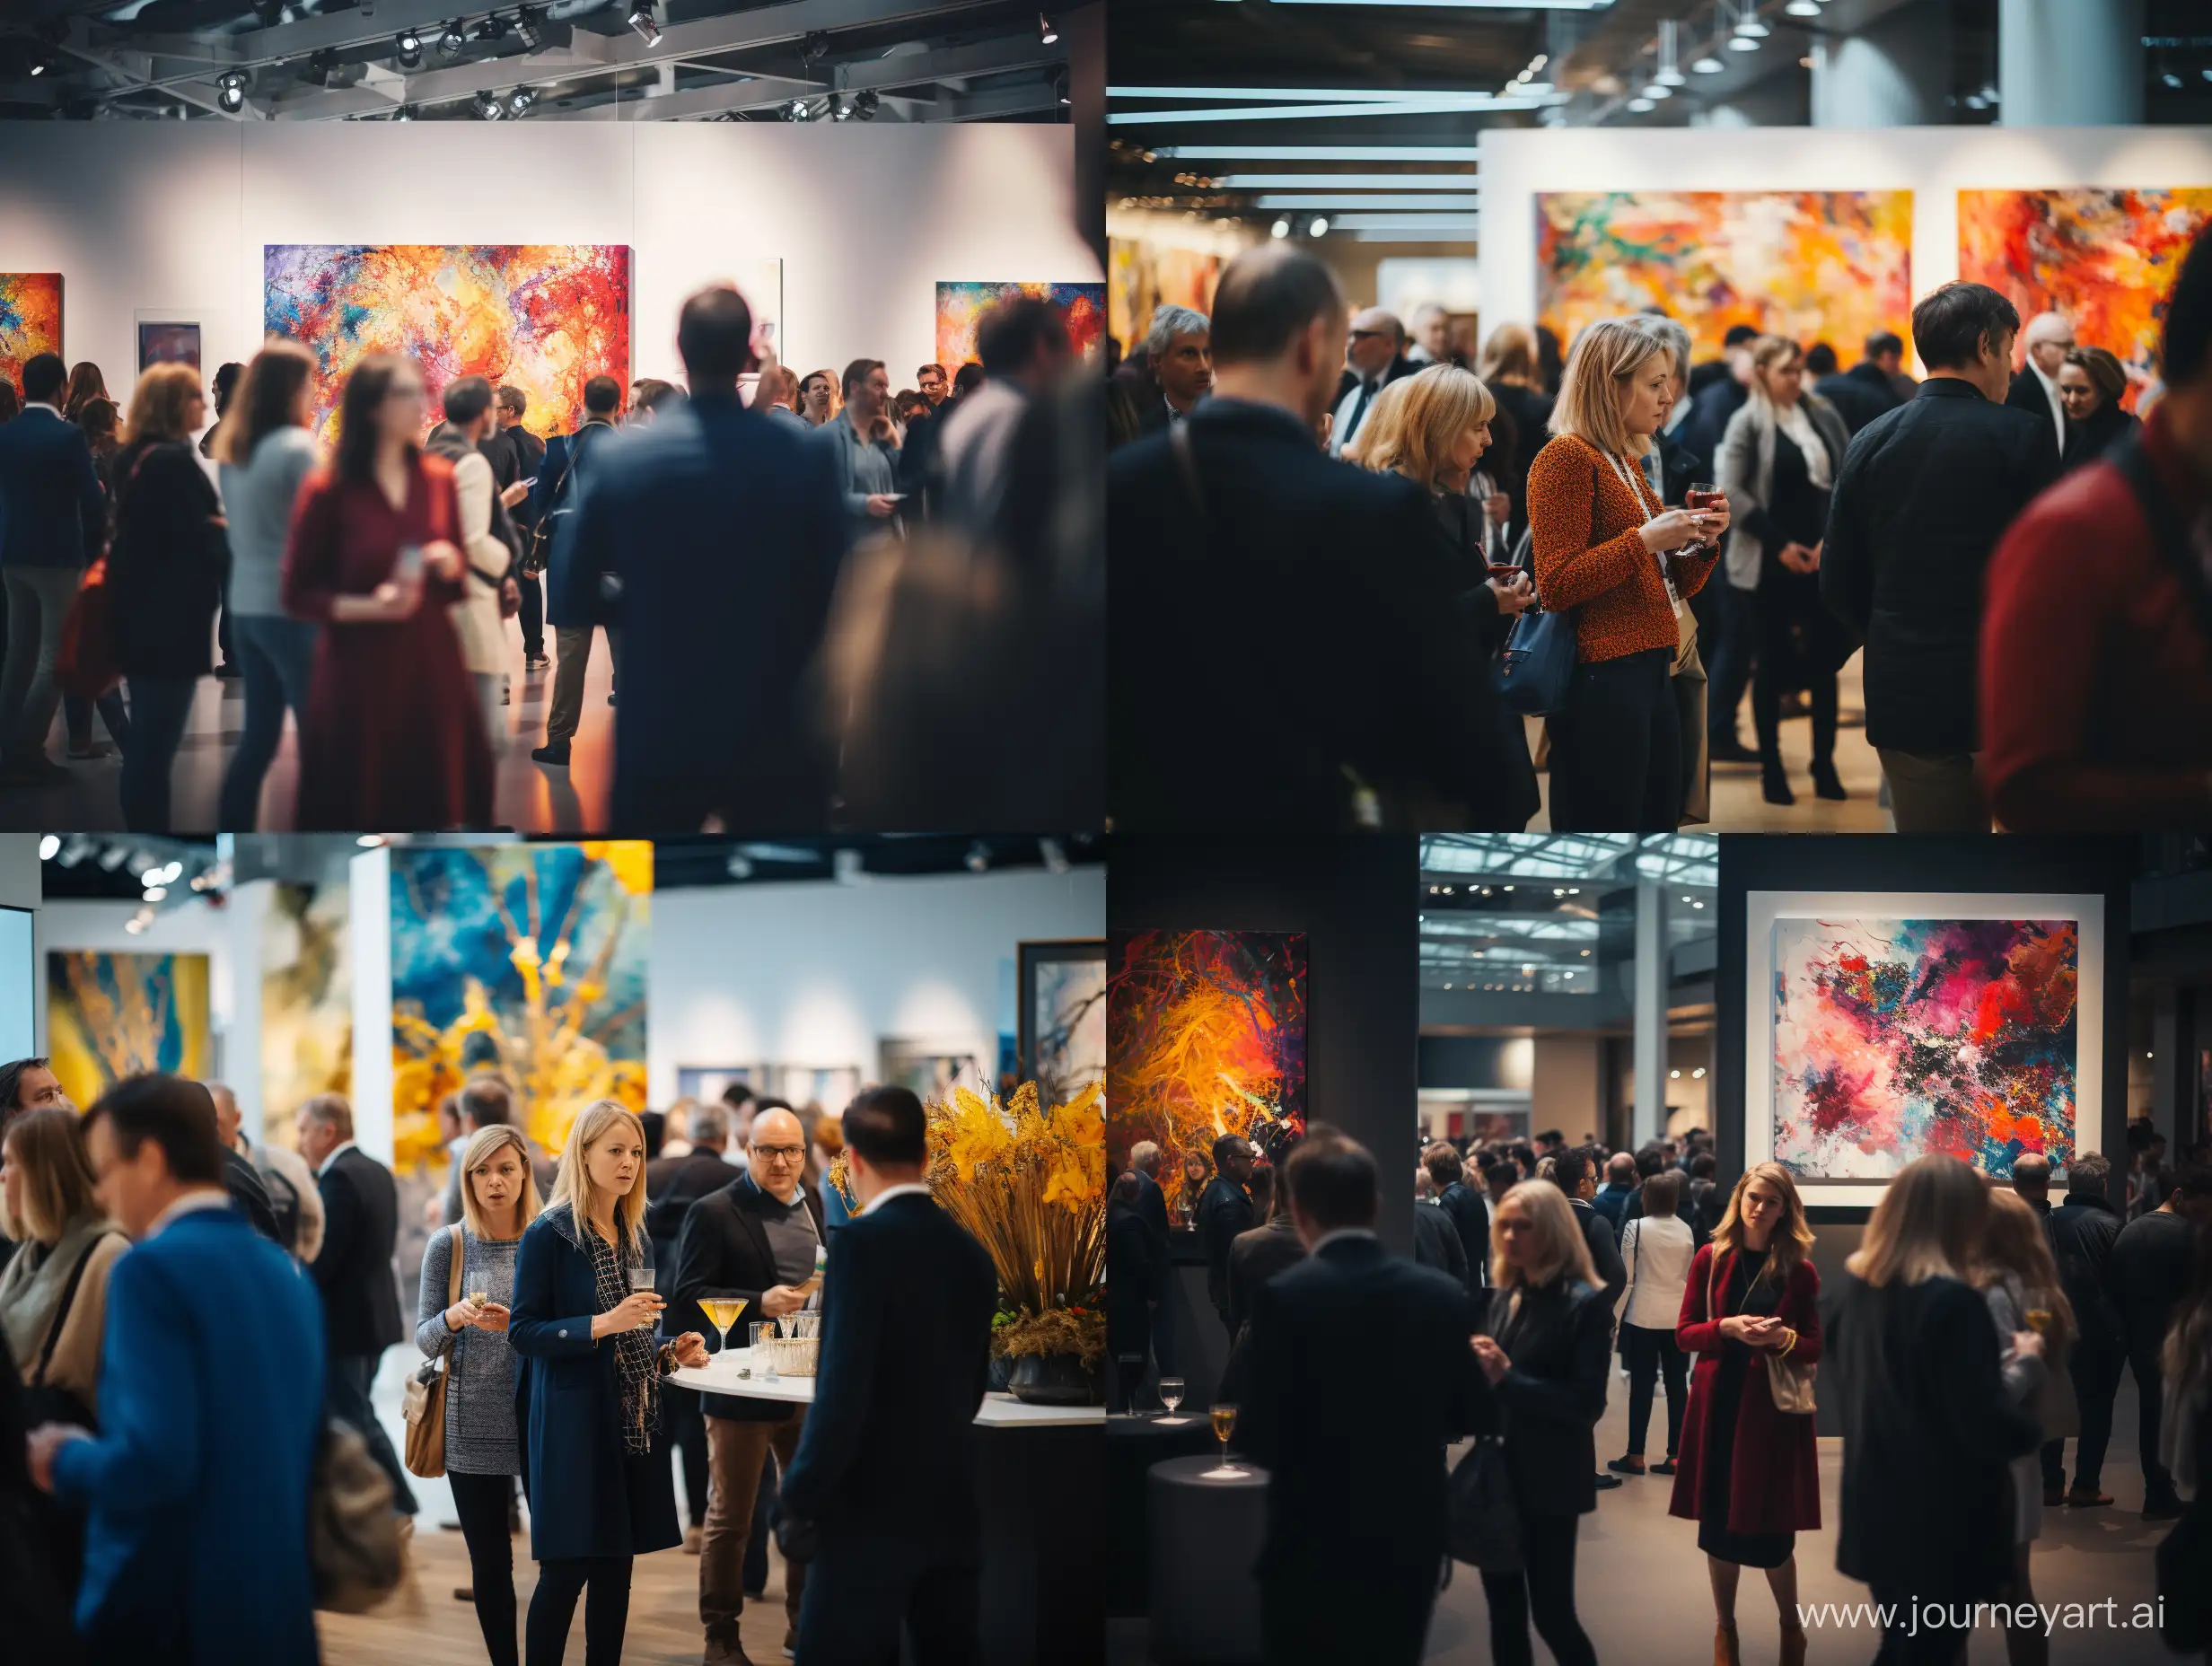 a busy exhibition event with many people visible in the blurred background